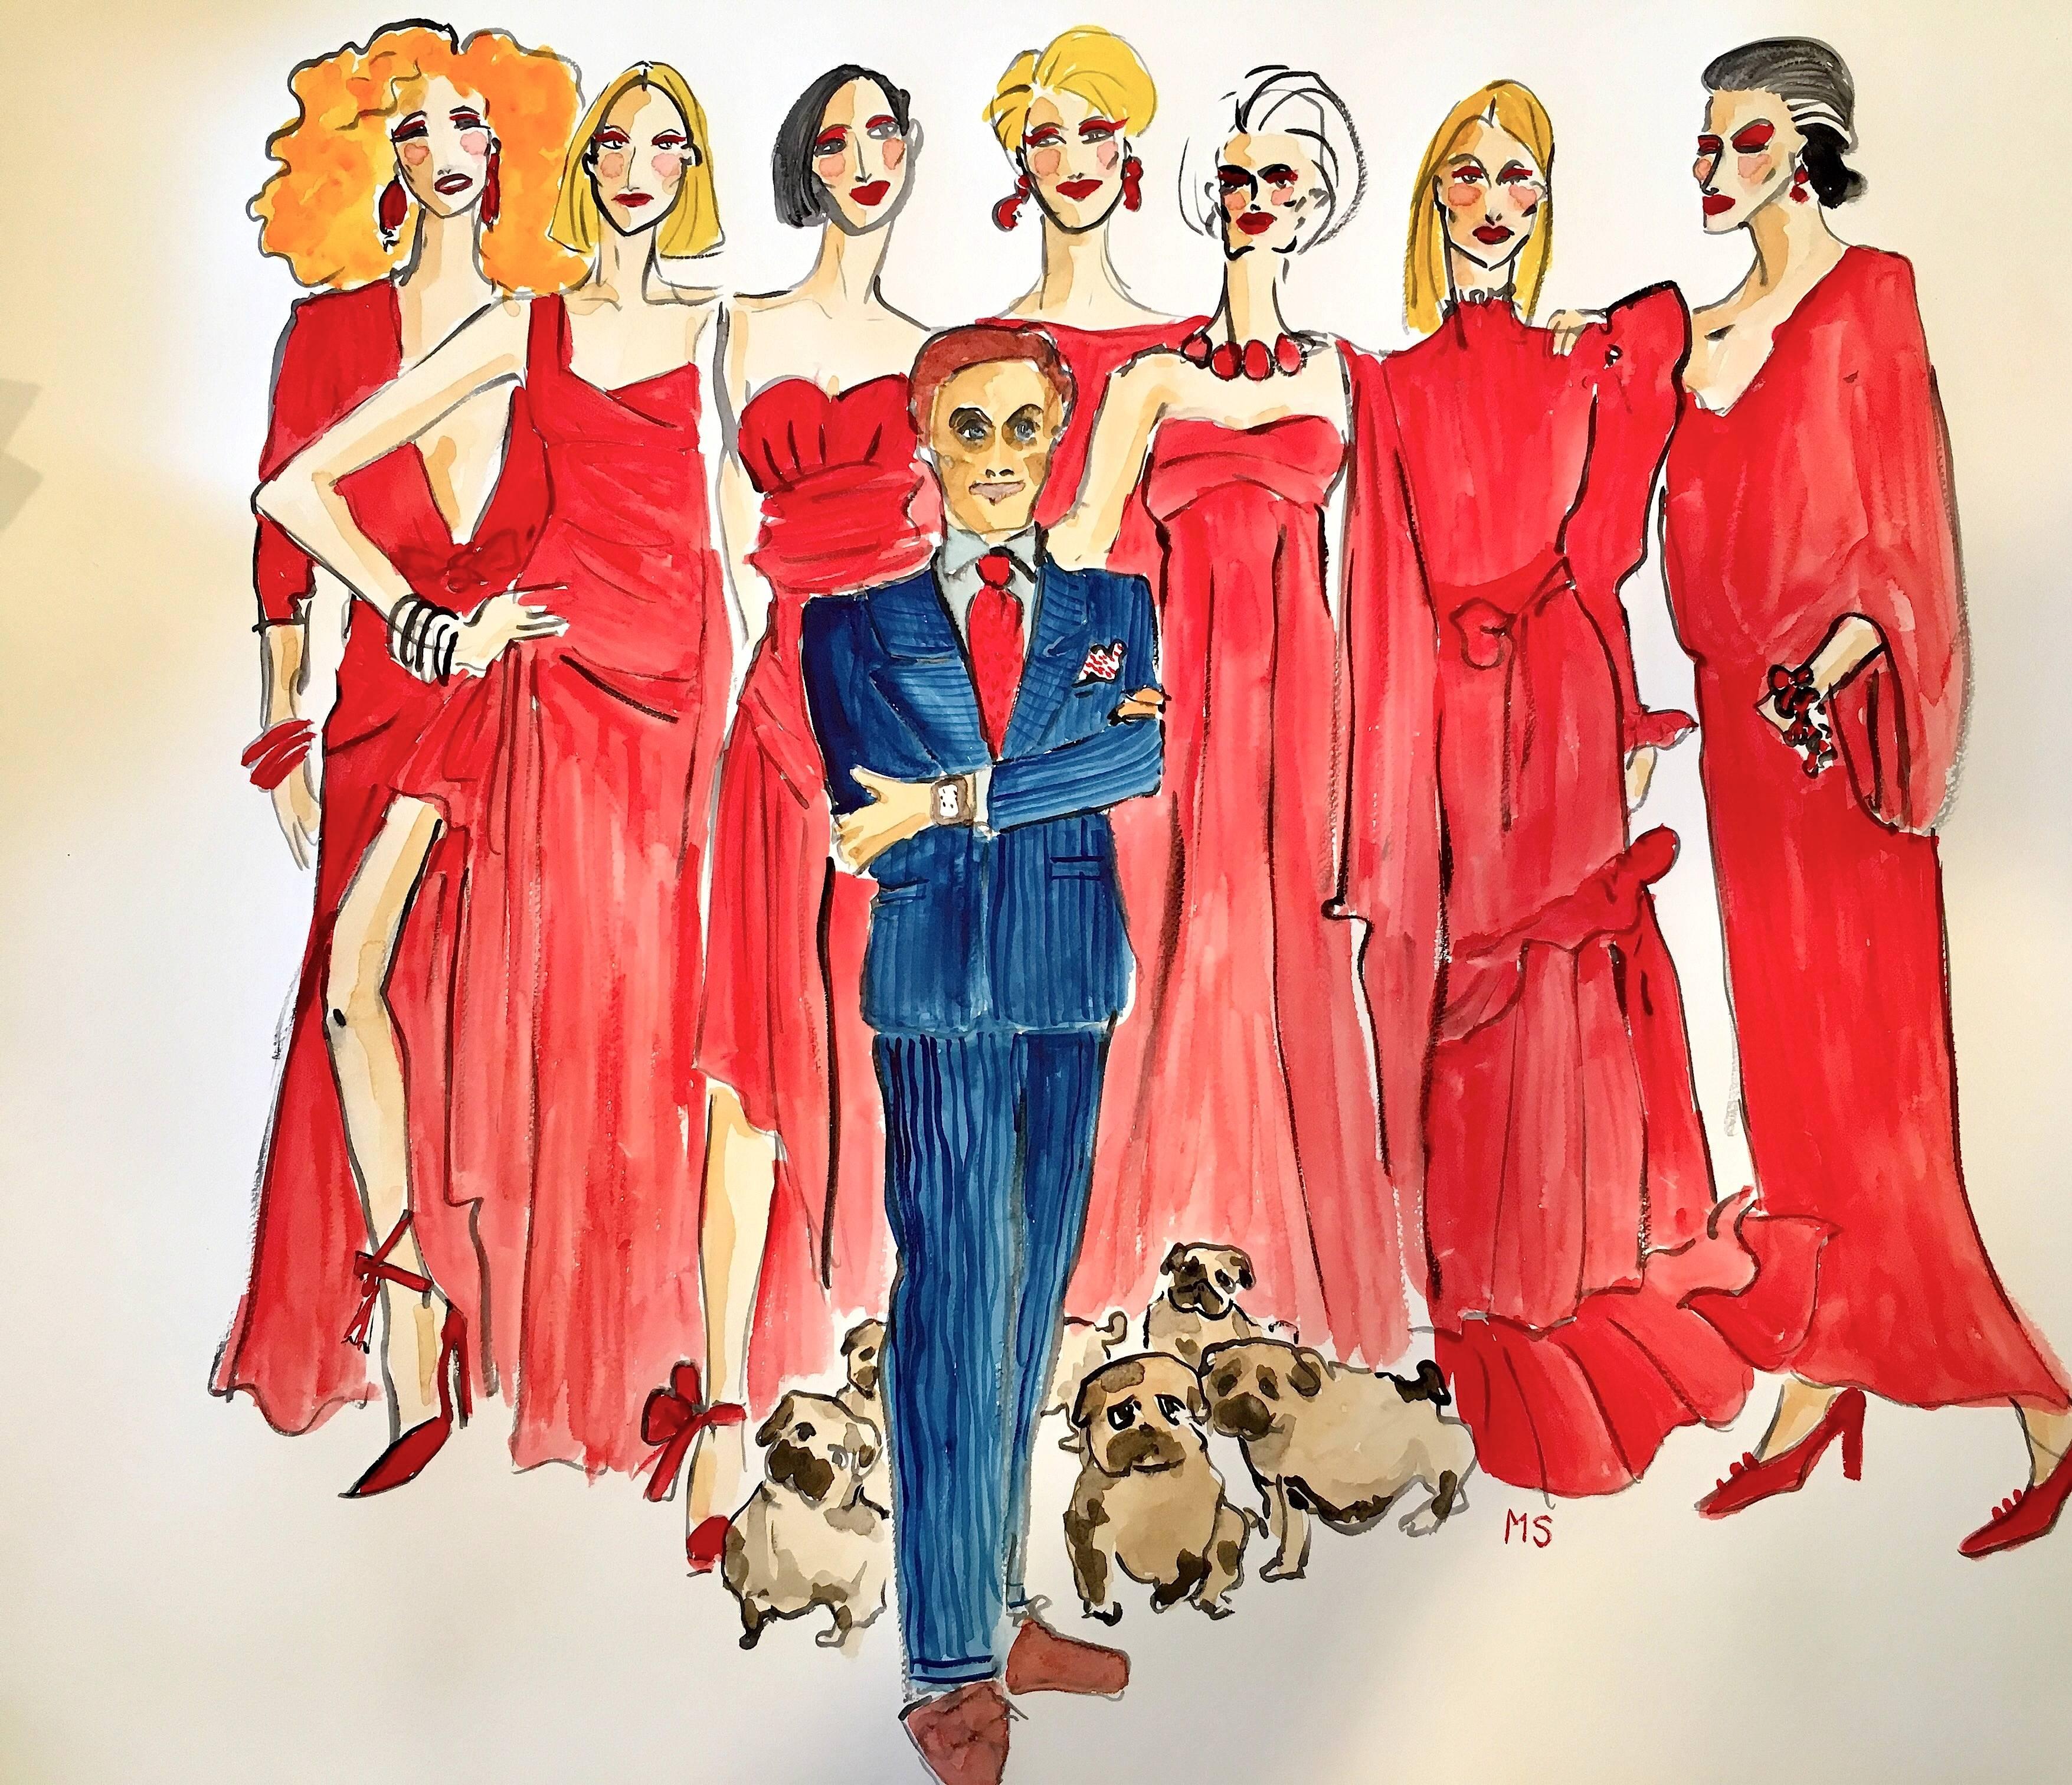 Valentino and his Muses - Art by Manuel Santelices